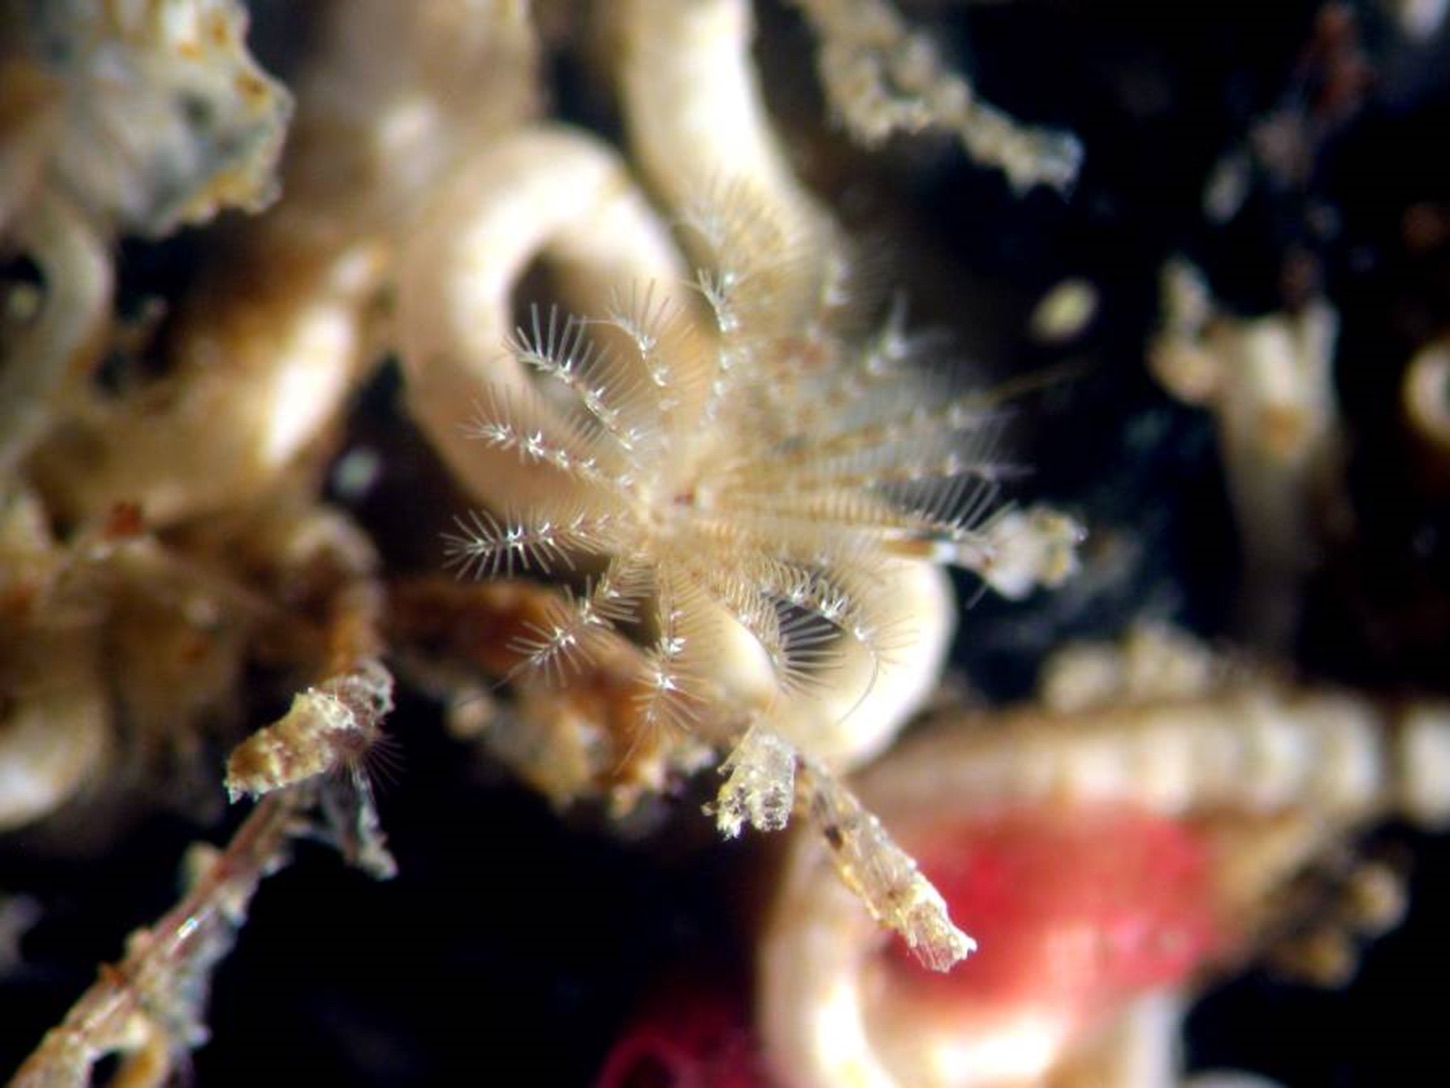 An adult tubeworm, in its tube, with its plume of tentacles extended.